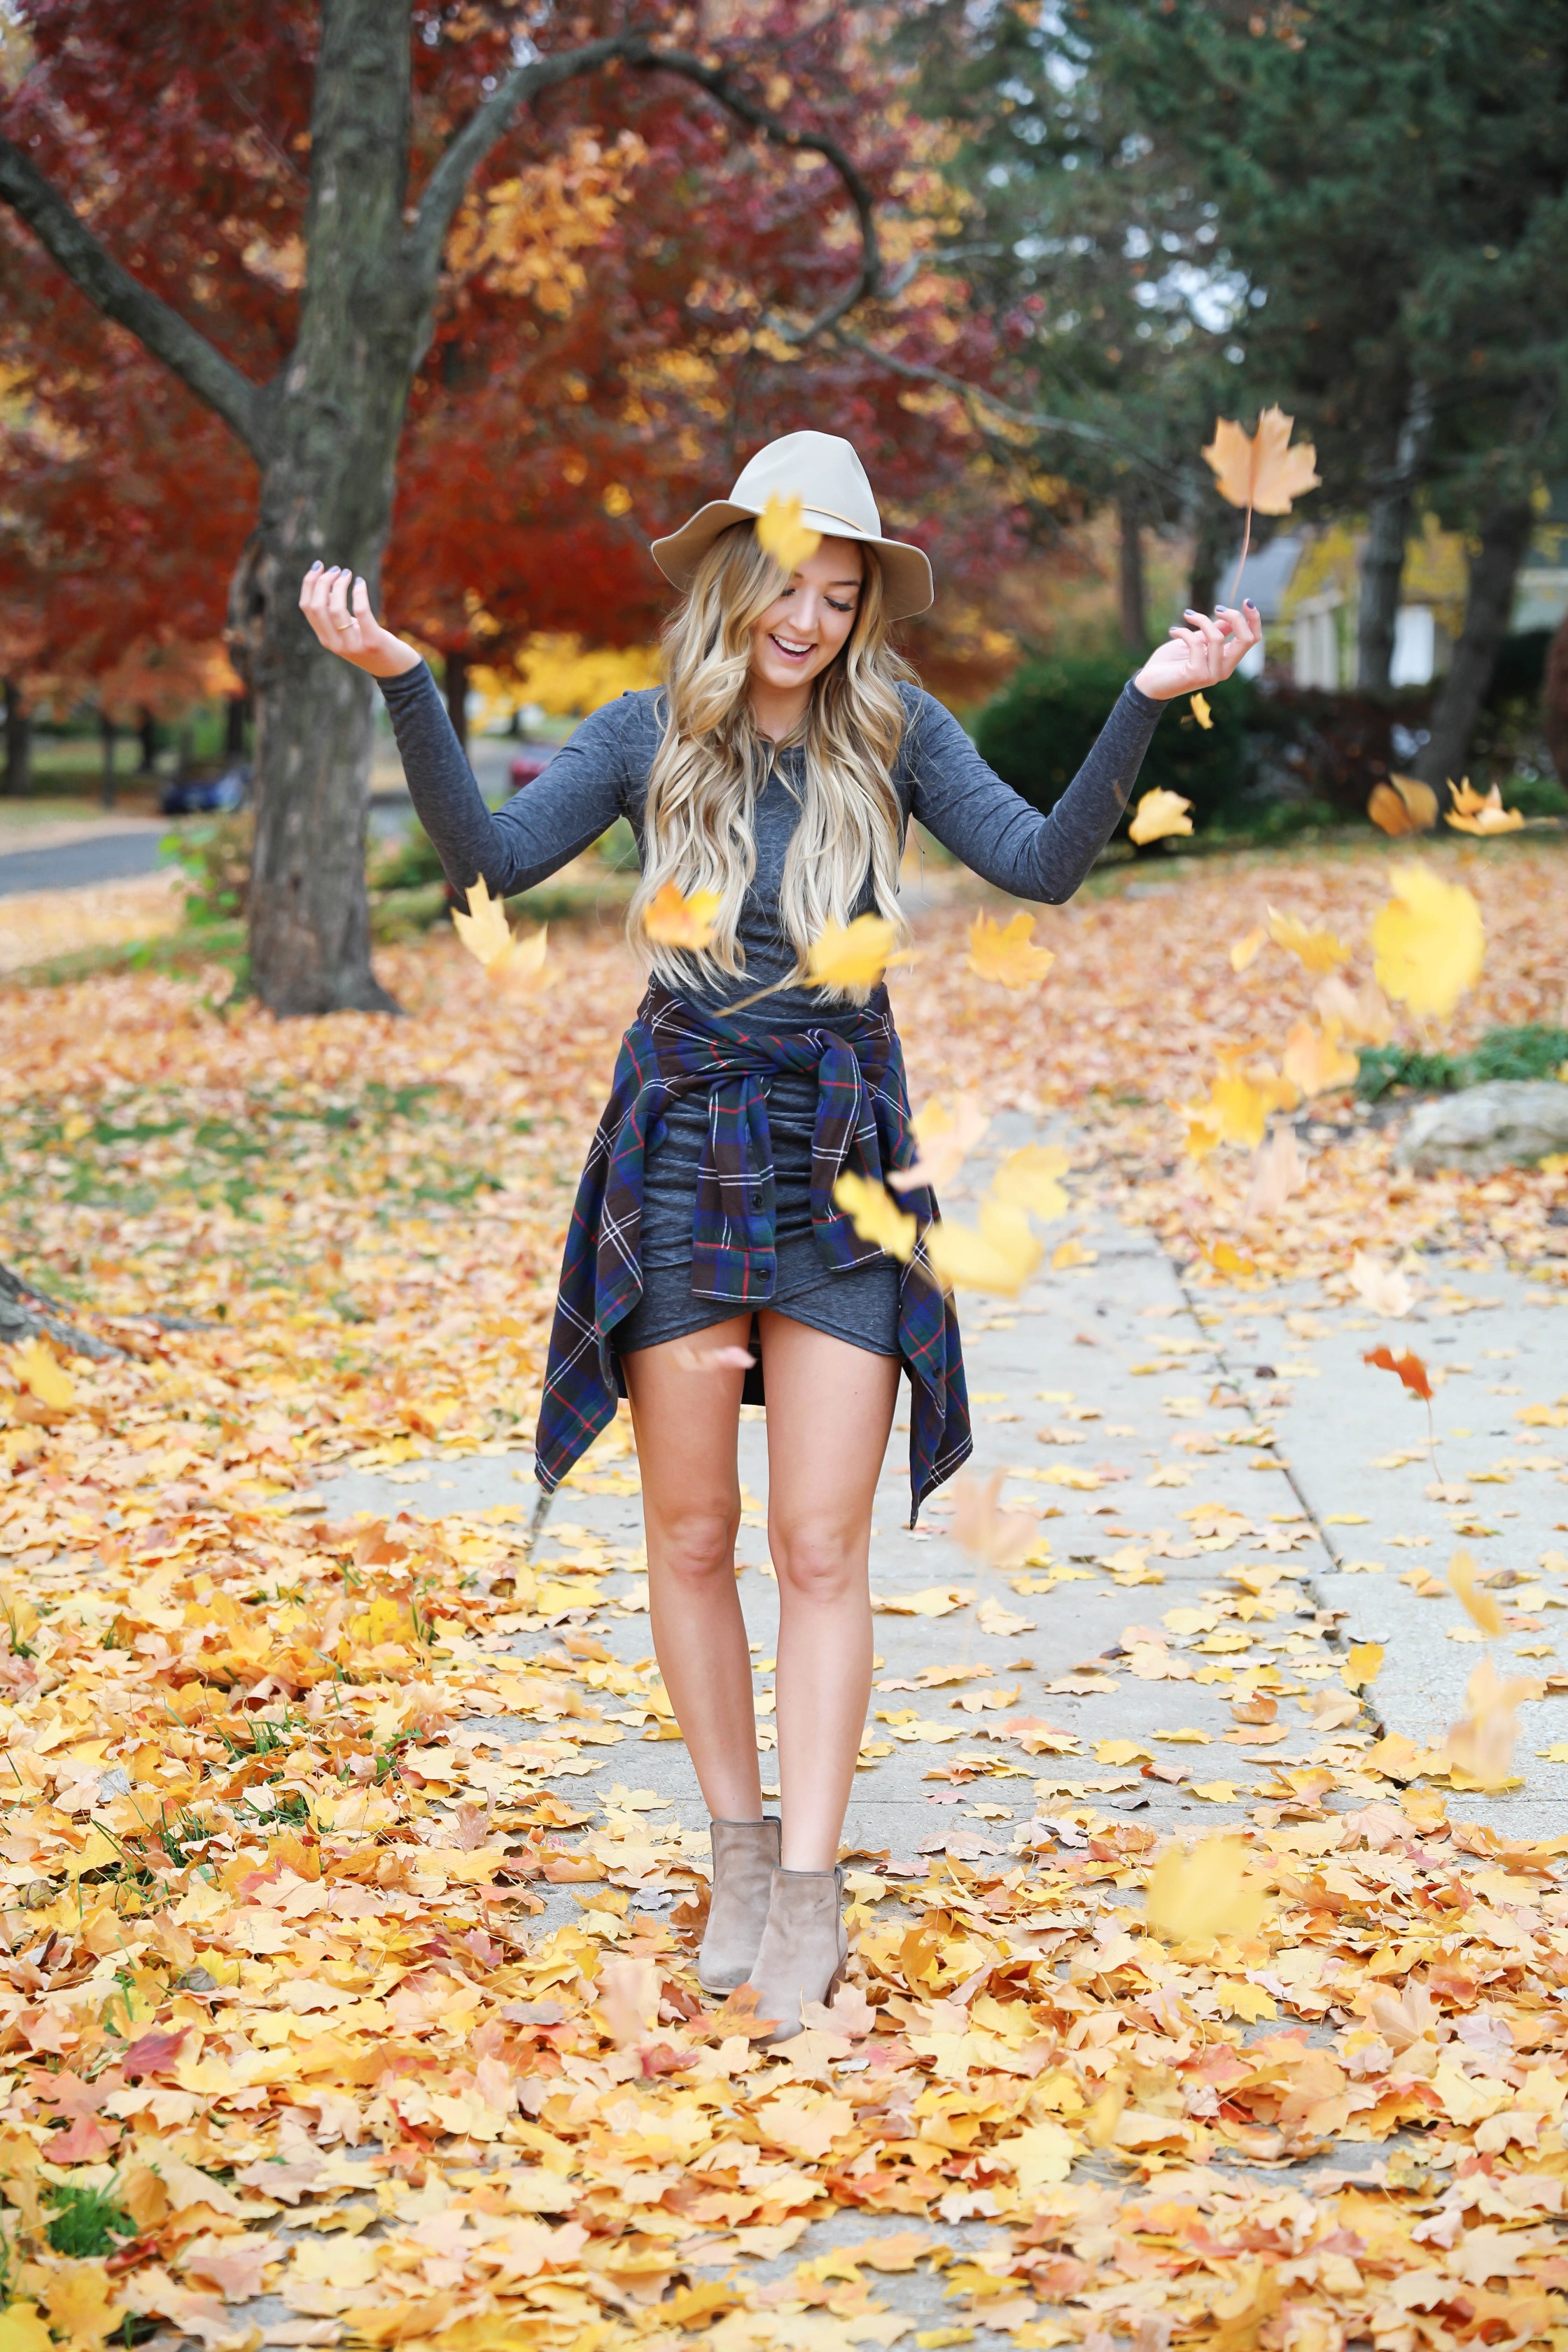 Gray long sleeve flattering dress with a cute flannel tied around the waist! These photos were taken in the prettiest fall leaves! I paired the outfit with this cute felt hat and suede booties! Details on fashion blog daily dose of charm by lauren lindmark